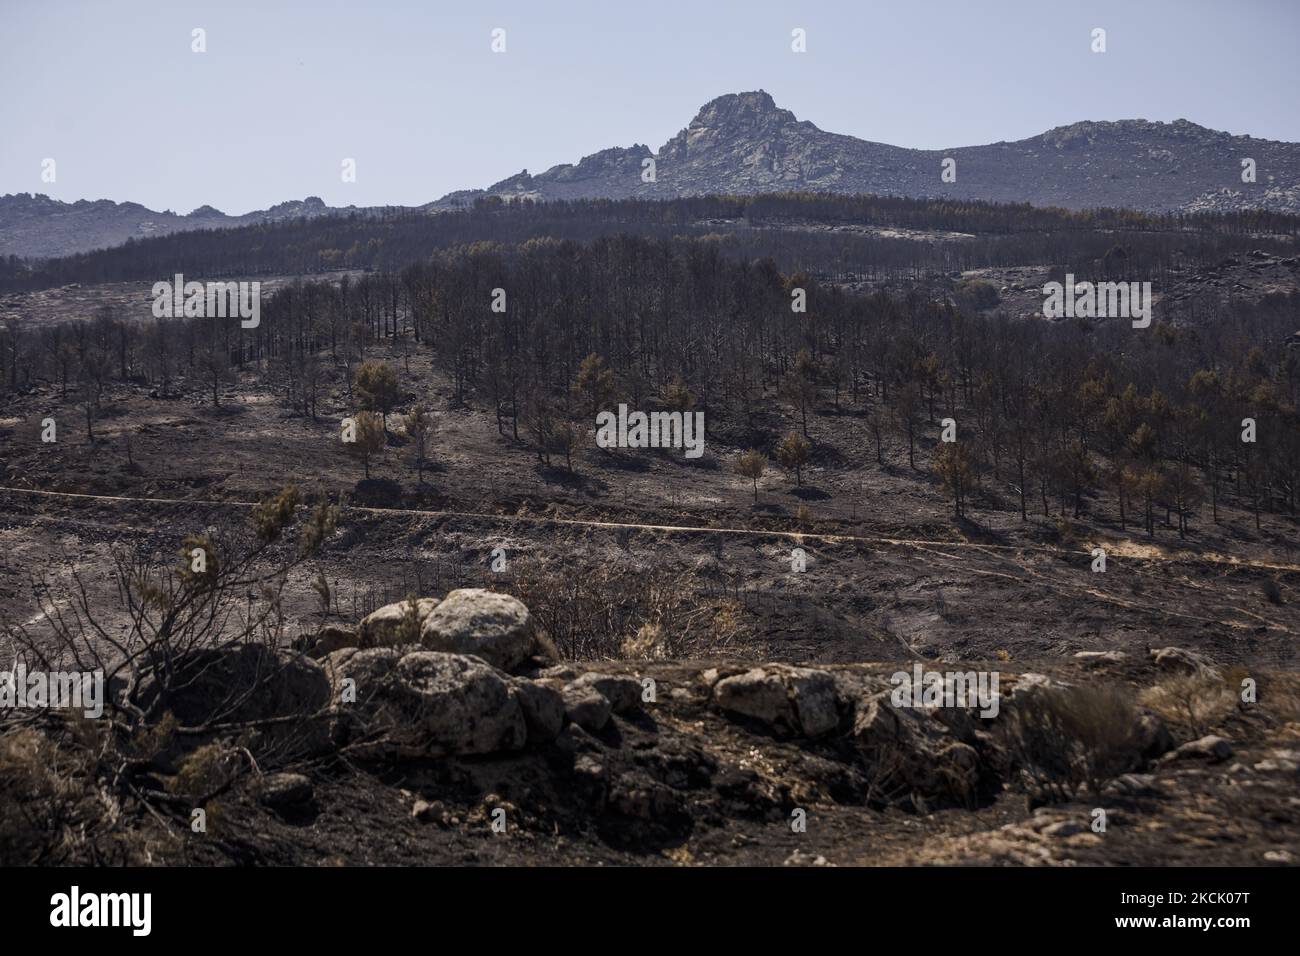 The fire in the province of Ávila started in the town of Navalacruz and has burned around 22,000 hectares with a perimeter of 130 kilometers, affecting various towns such as Riorio, Sotalbo, Villaviciosa and Mironcillo among them. It is considered the fourth most important in terms of extension that has occurred in Spain. Images from the surroundings of Sotalbo where the flames came very close to the population. (Photo by DAX Images/NurPhoto) Stock Photo